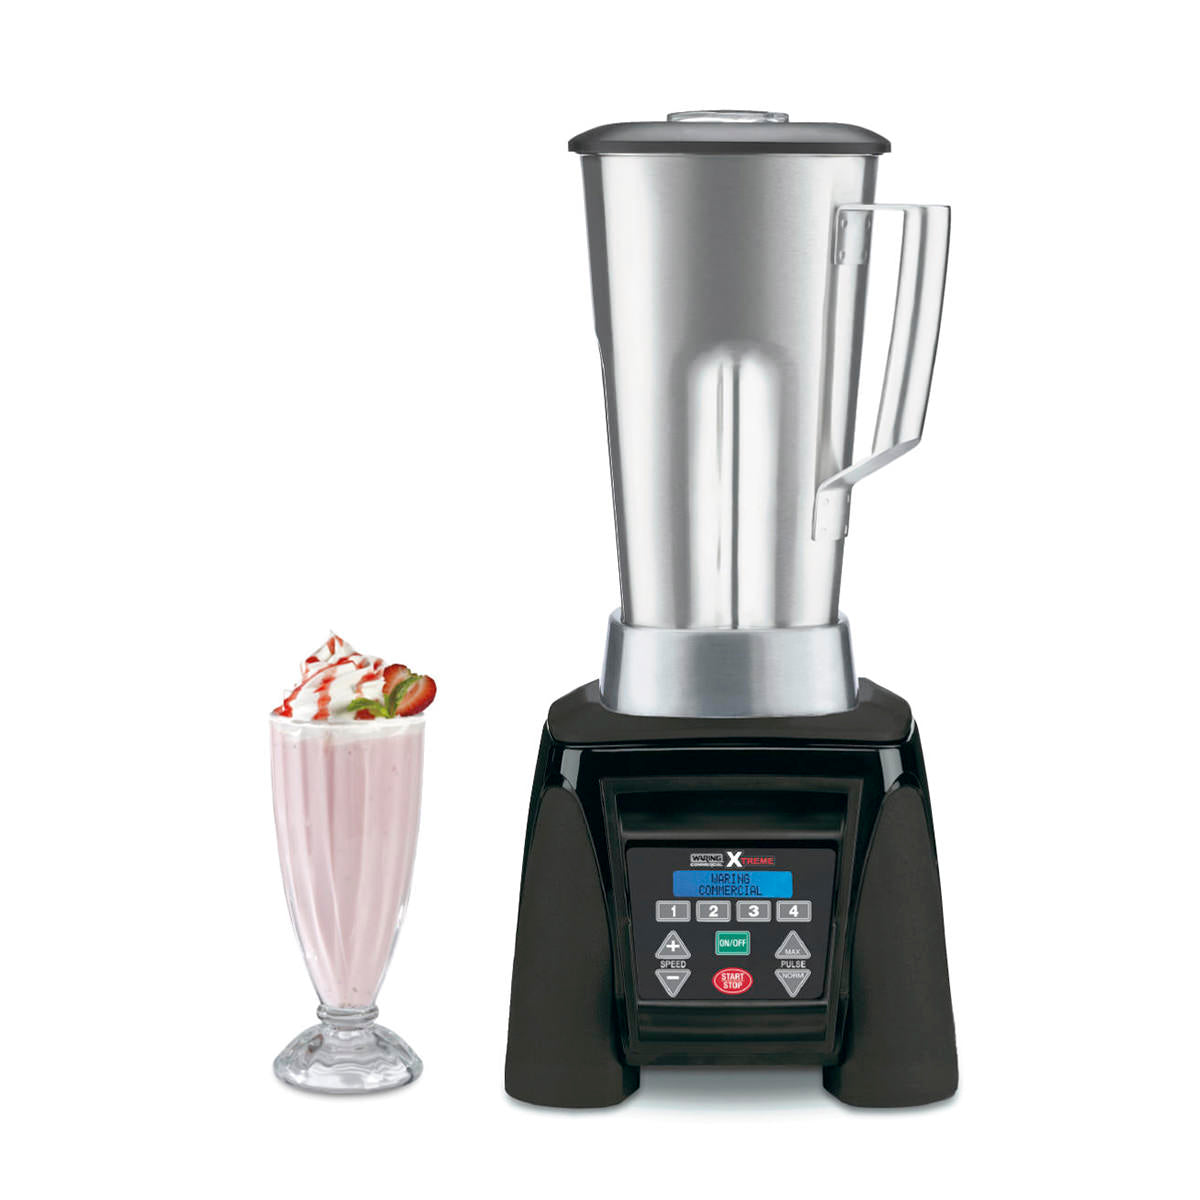 MX1300XTS Heavy-Duty Reprogrammable Blender with 64 oz Stainless Steel Jar by Waring Commercial